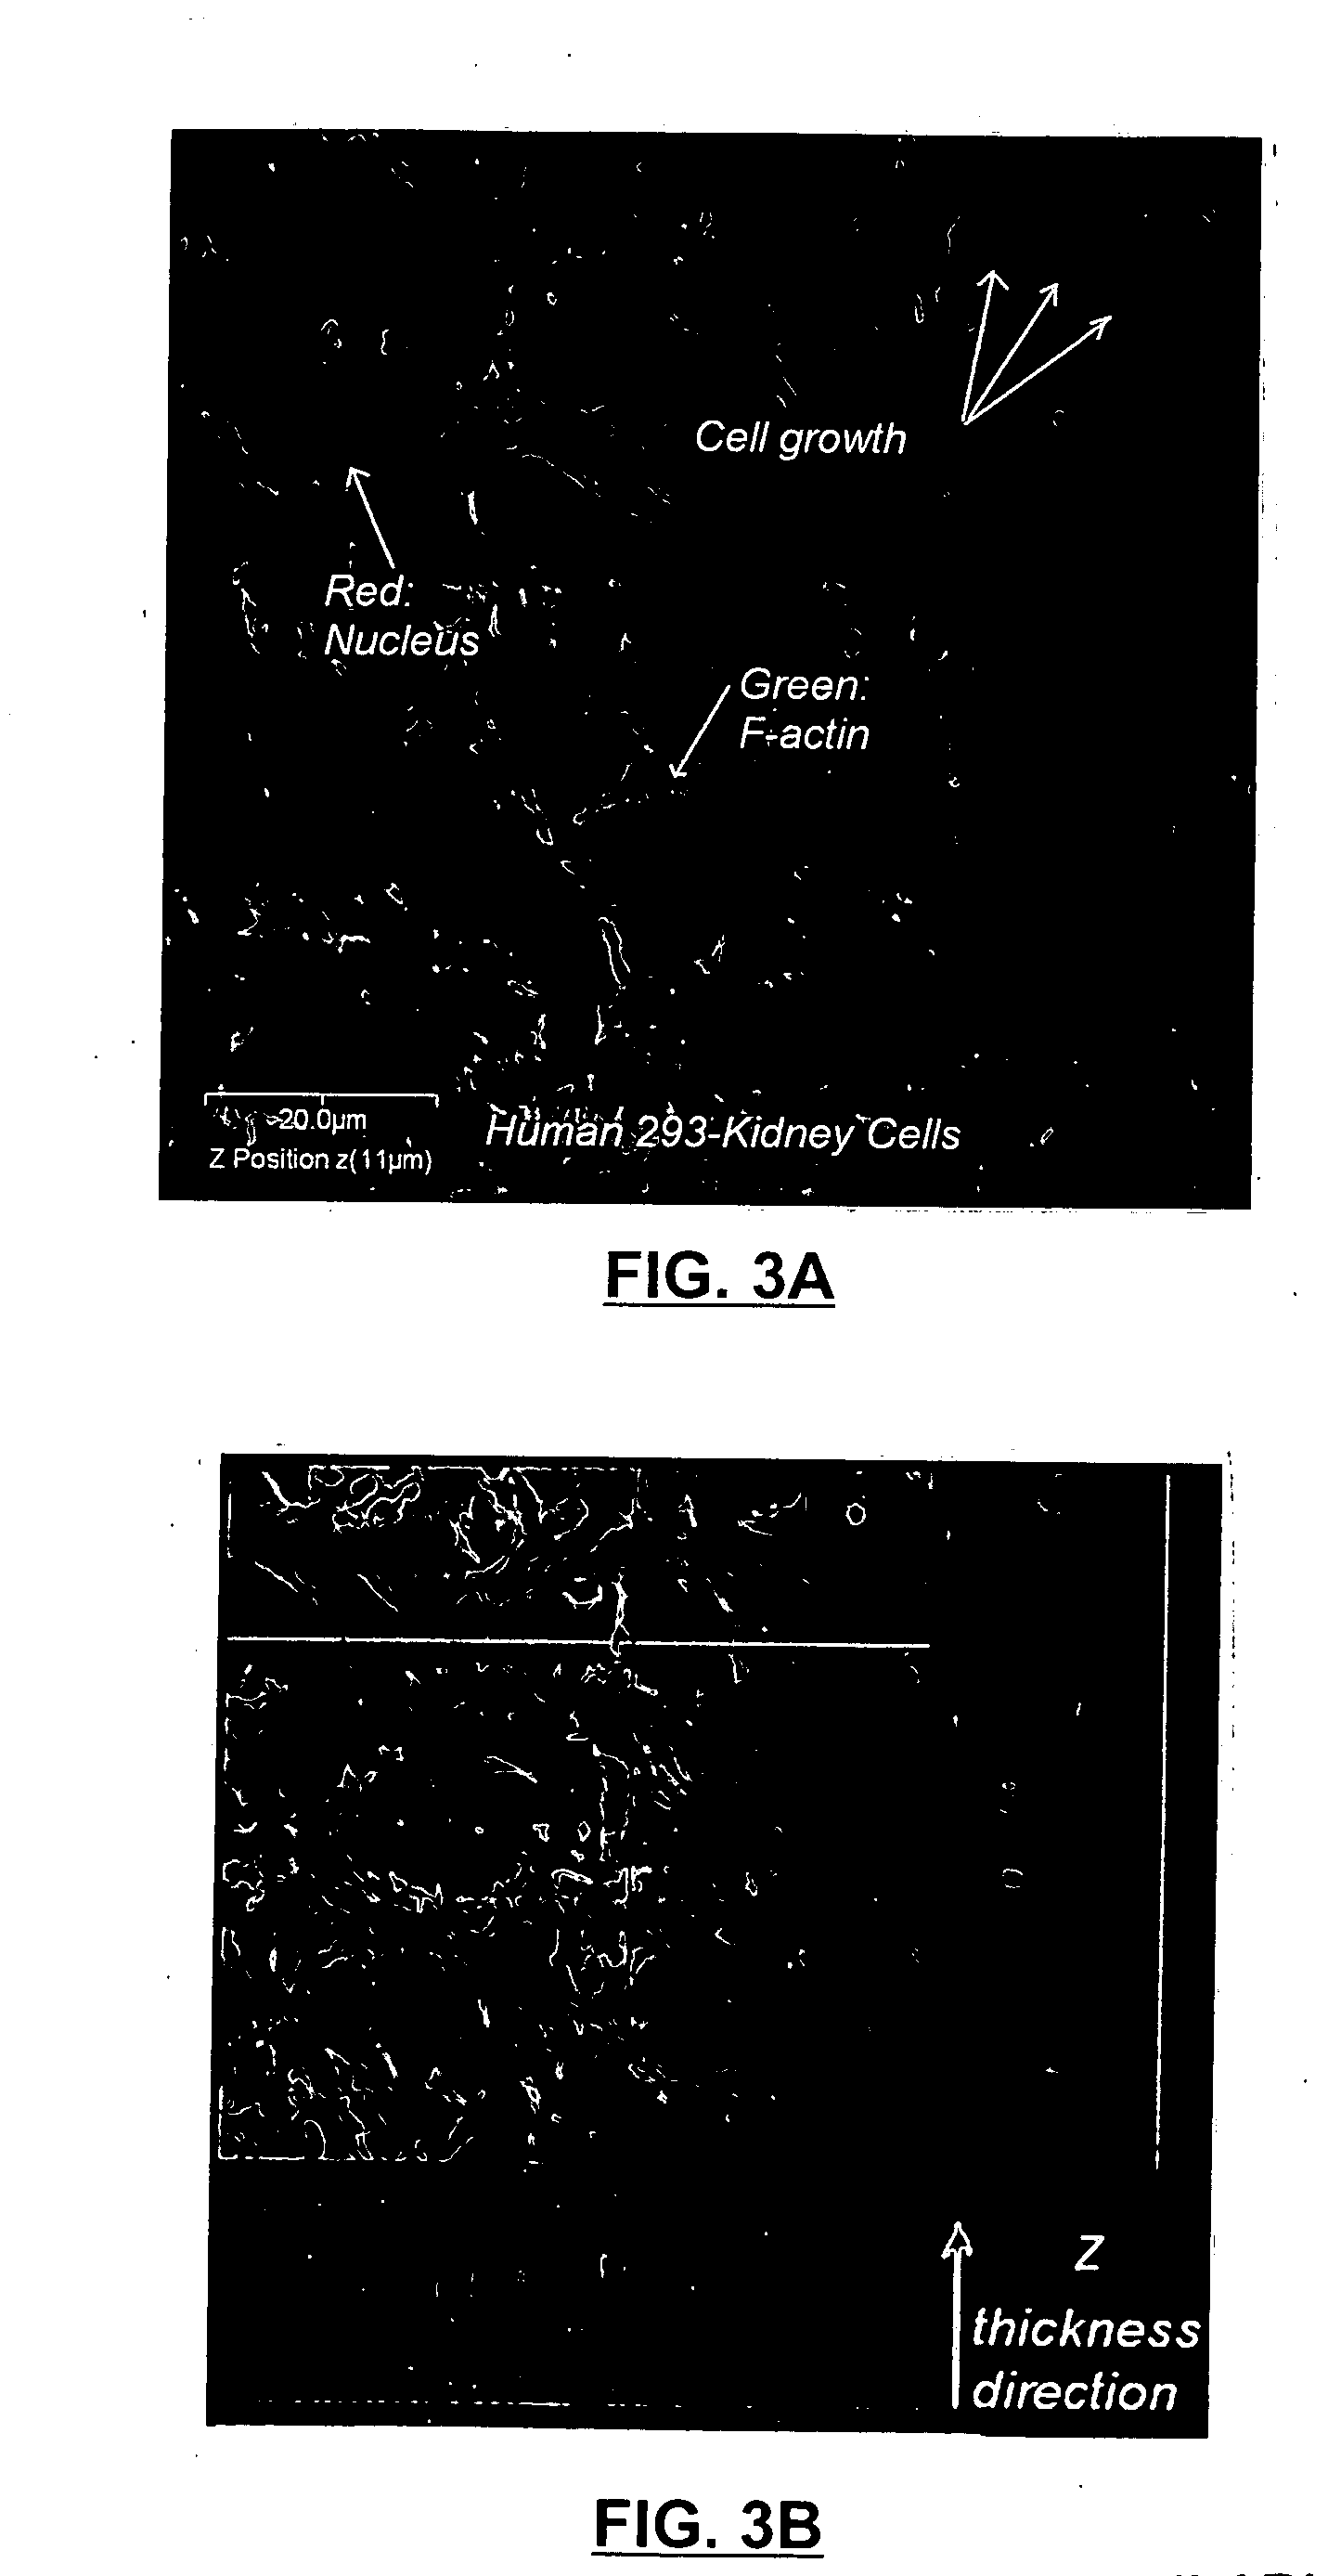 Method and systems for forming and using nanoengineered sculptured thin films